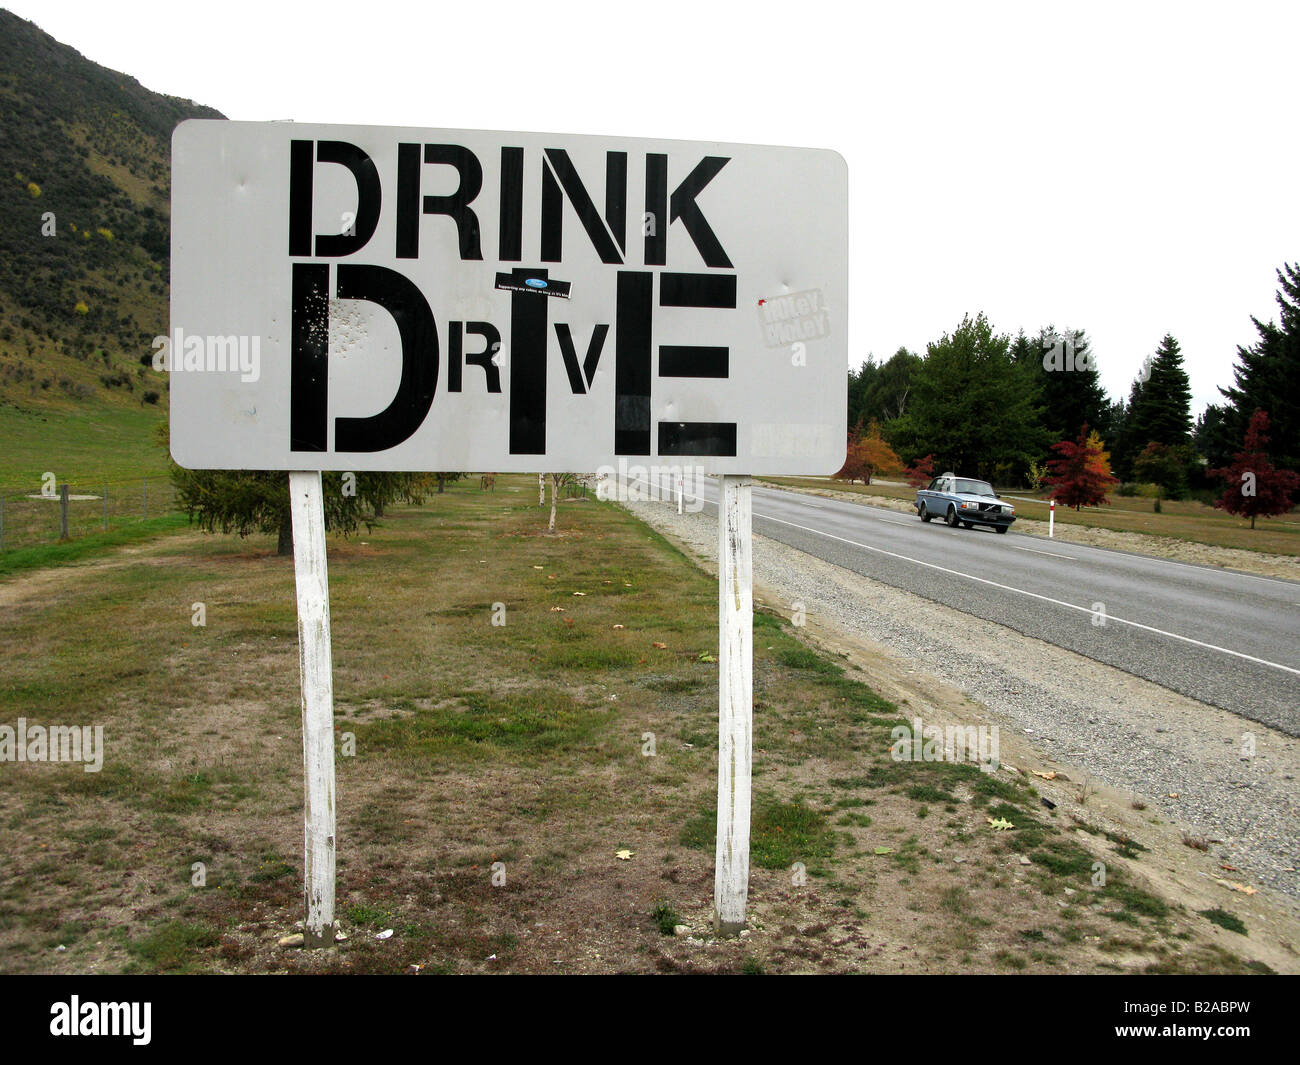 An anti Drink and drive advertising sign on a road near Wanaka New Zealand Stock Photo